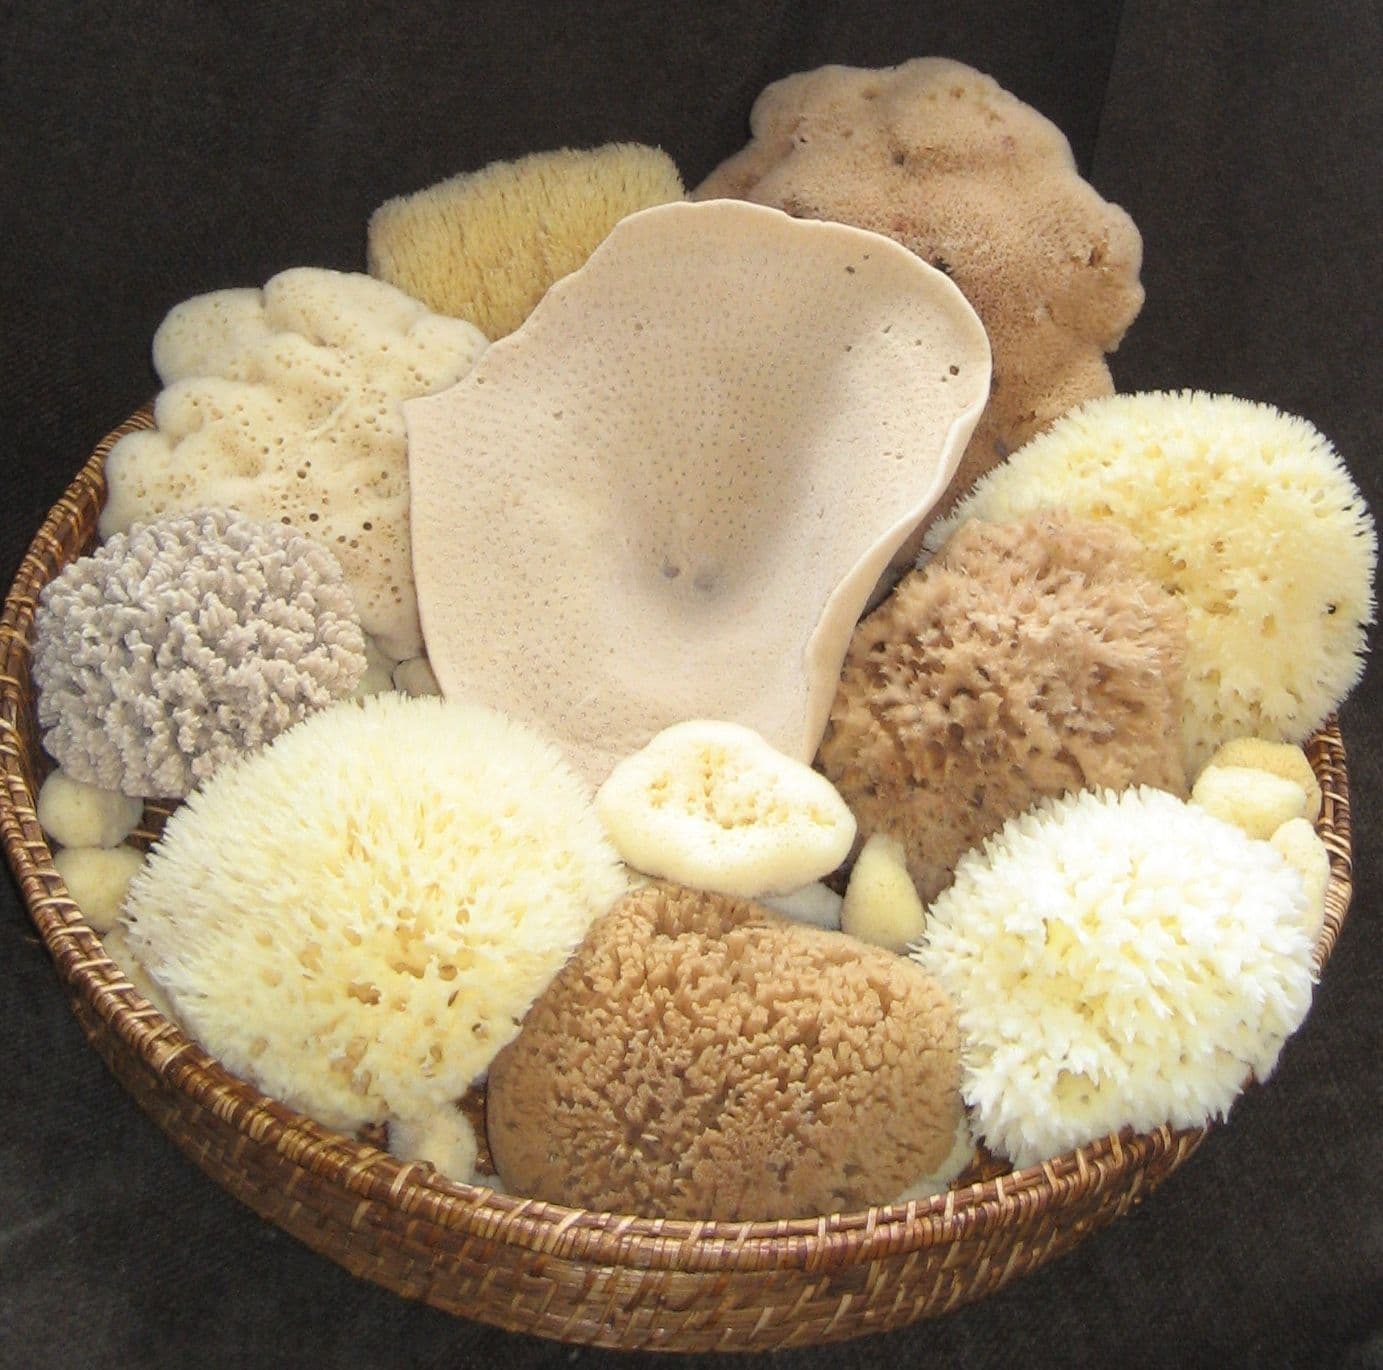 Everything You Need To Know About Natural Sponges